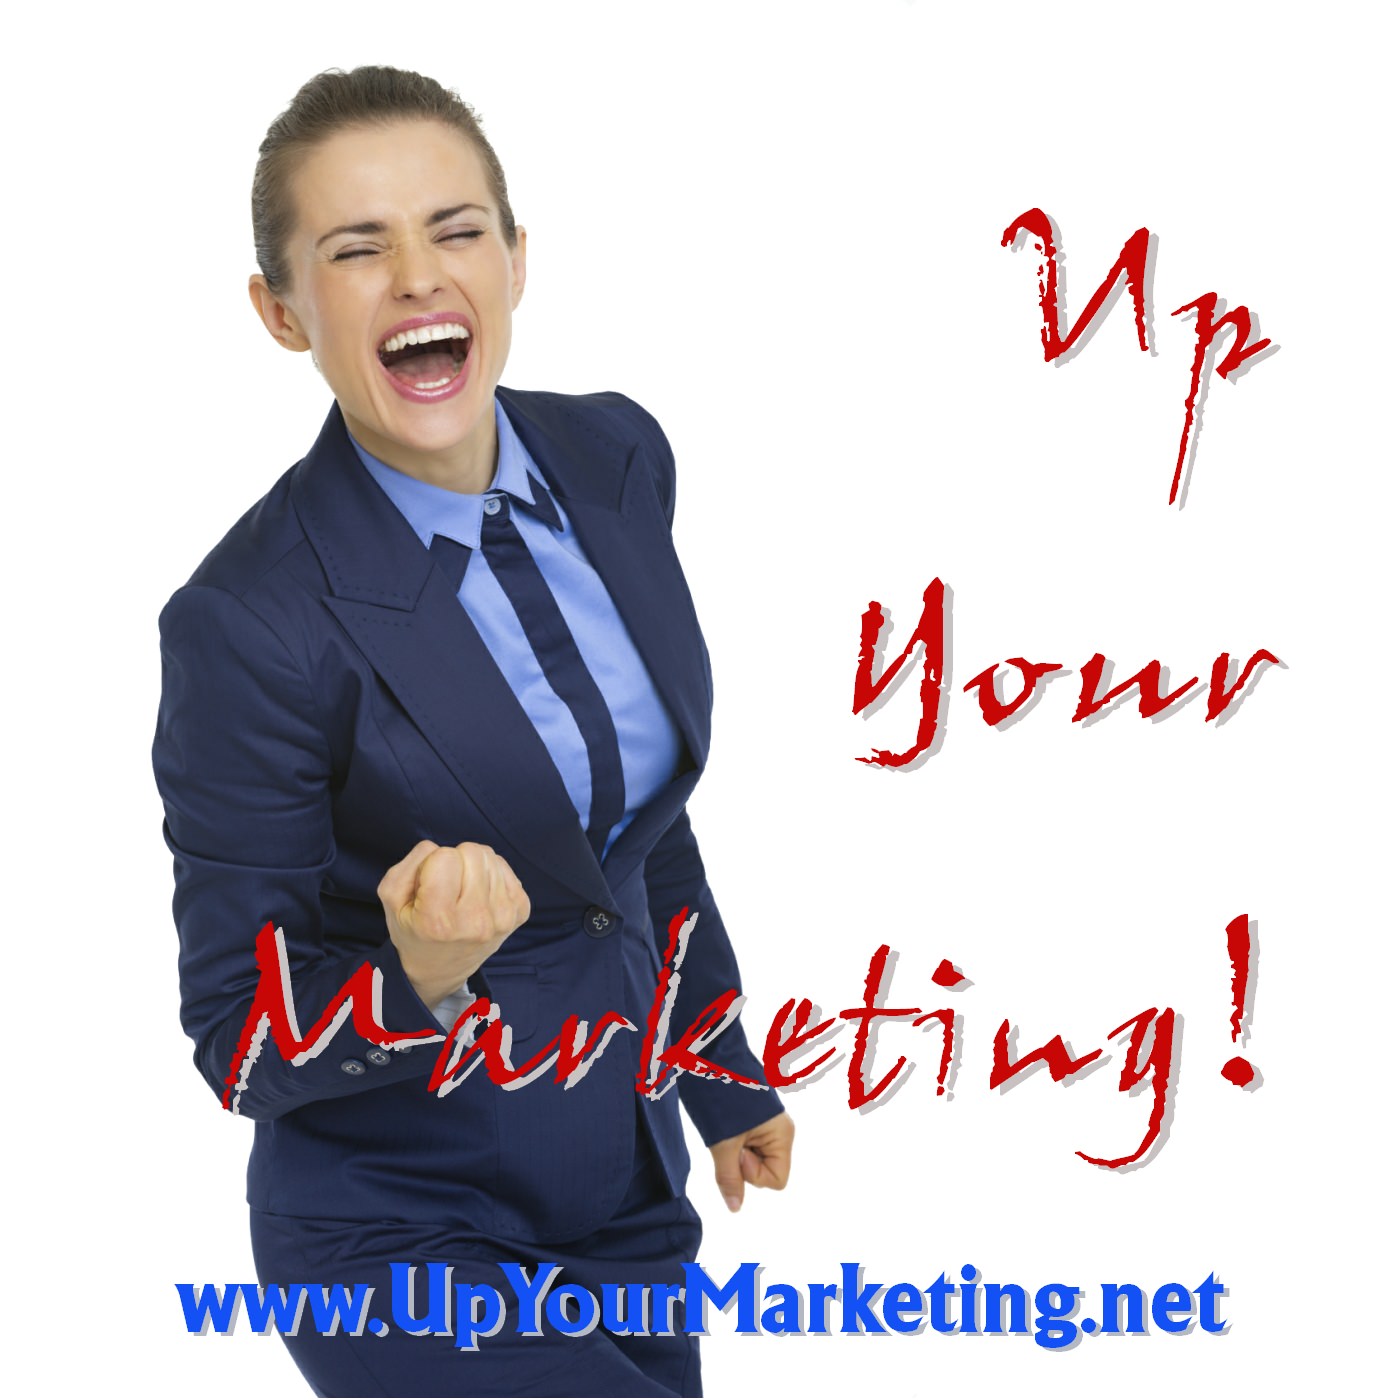 Up Your Marketing!